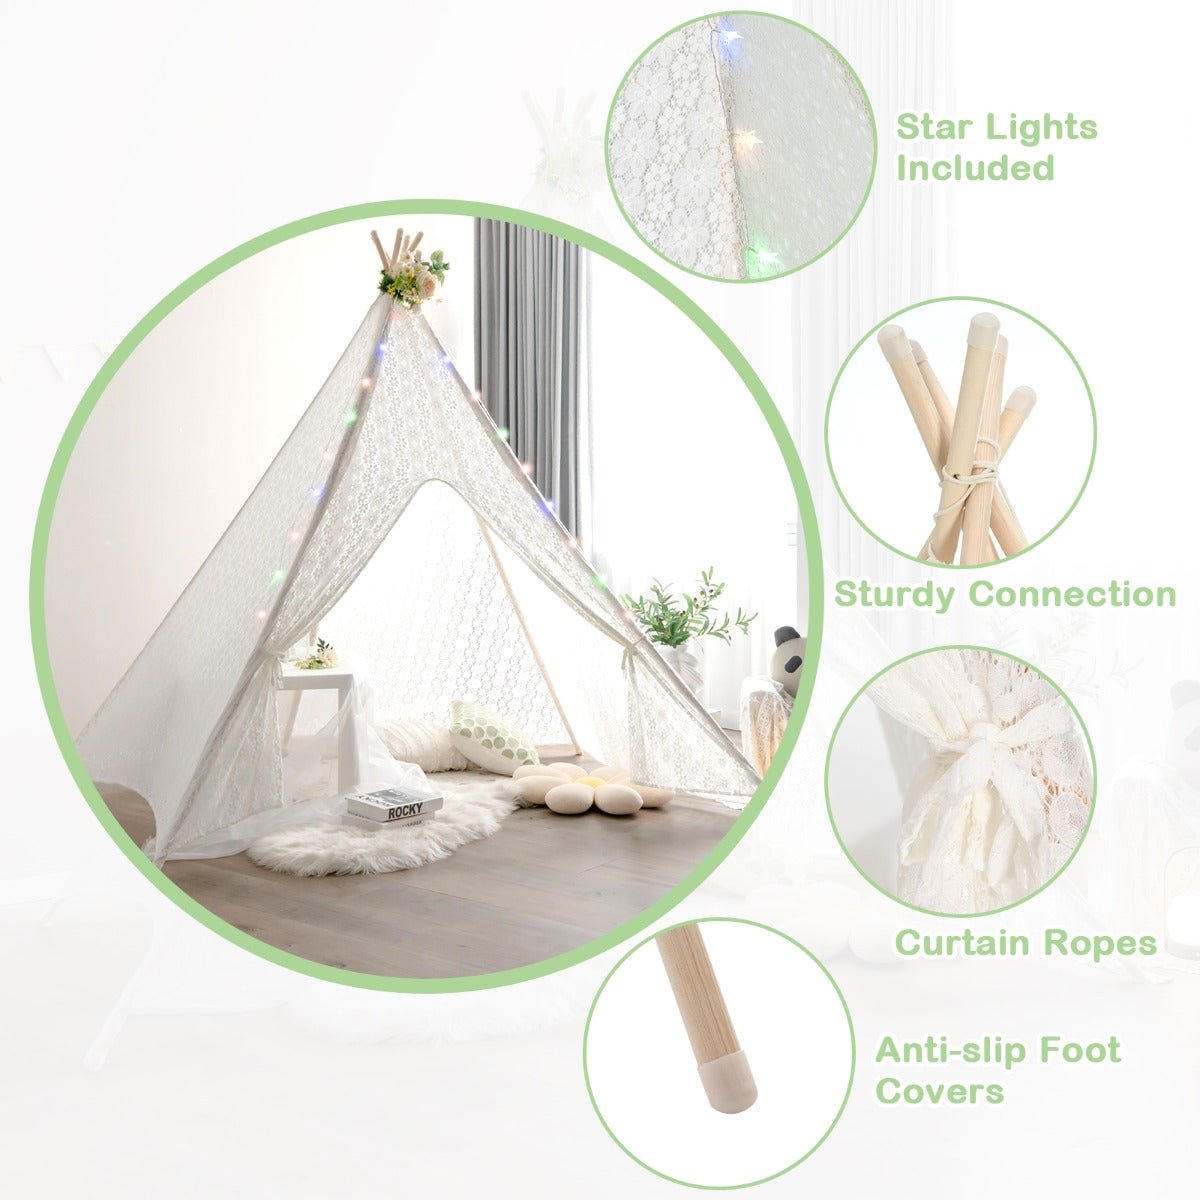 Whimsy and Light: Lace Teepee Tent with colourful Lights for Everyone